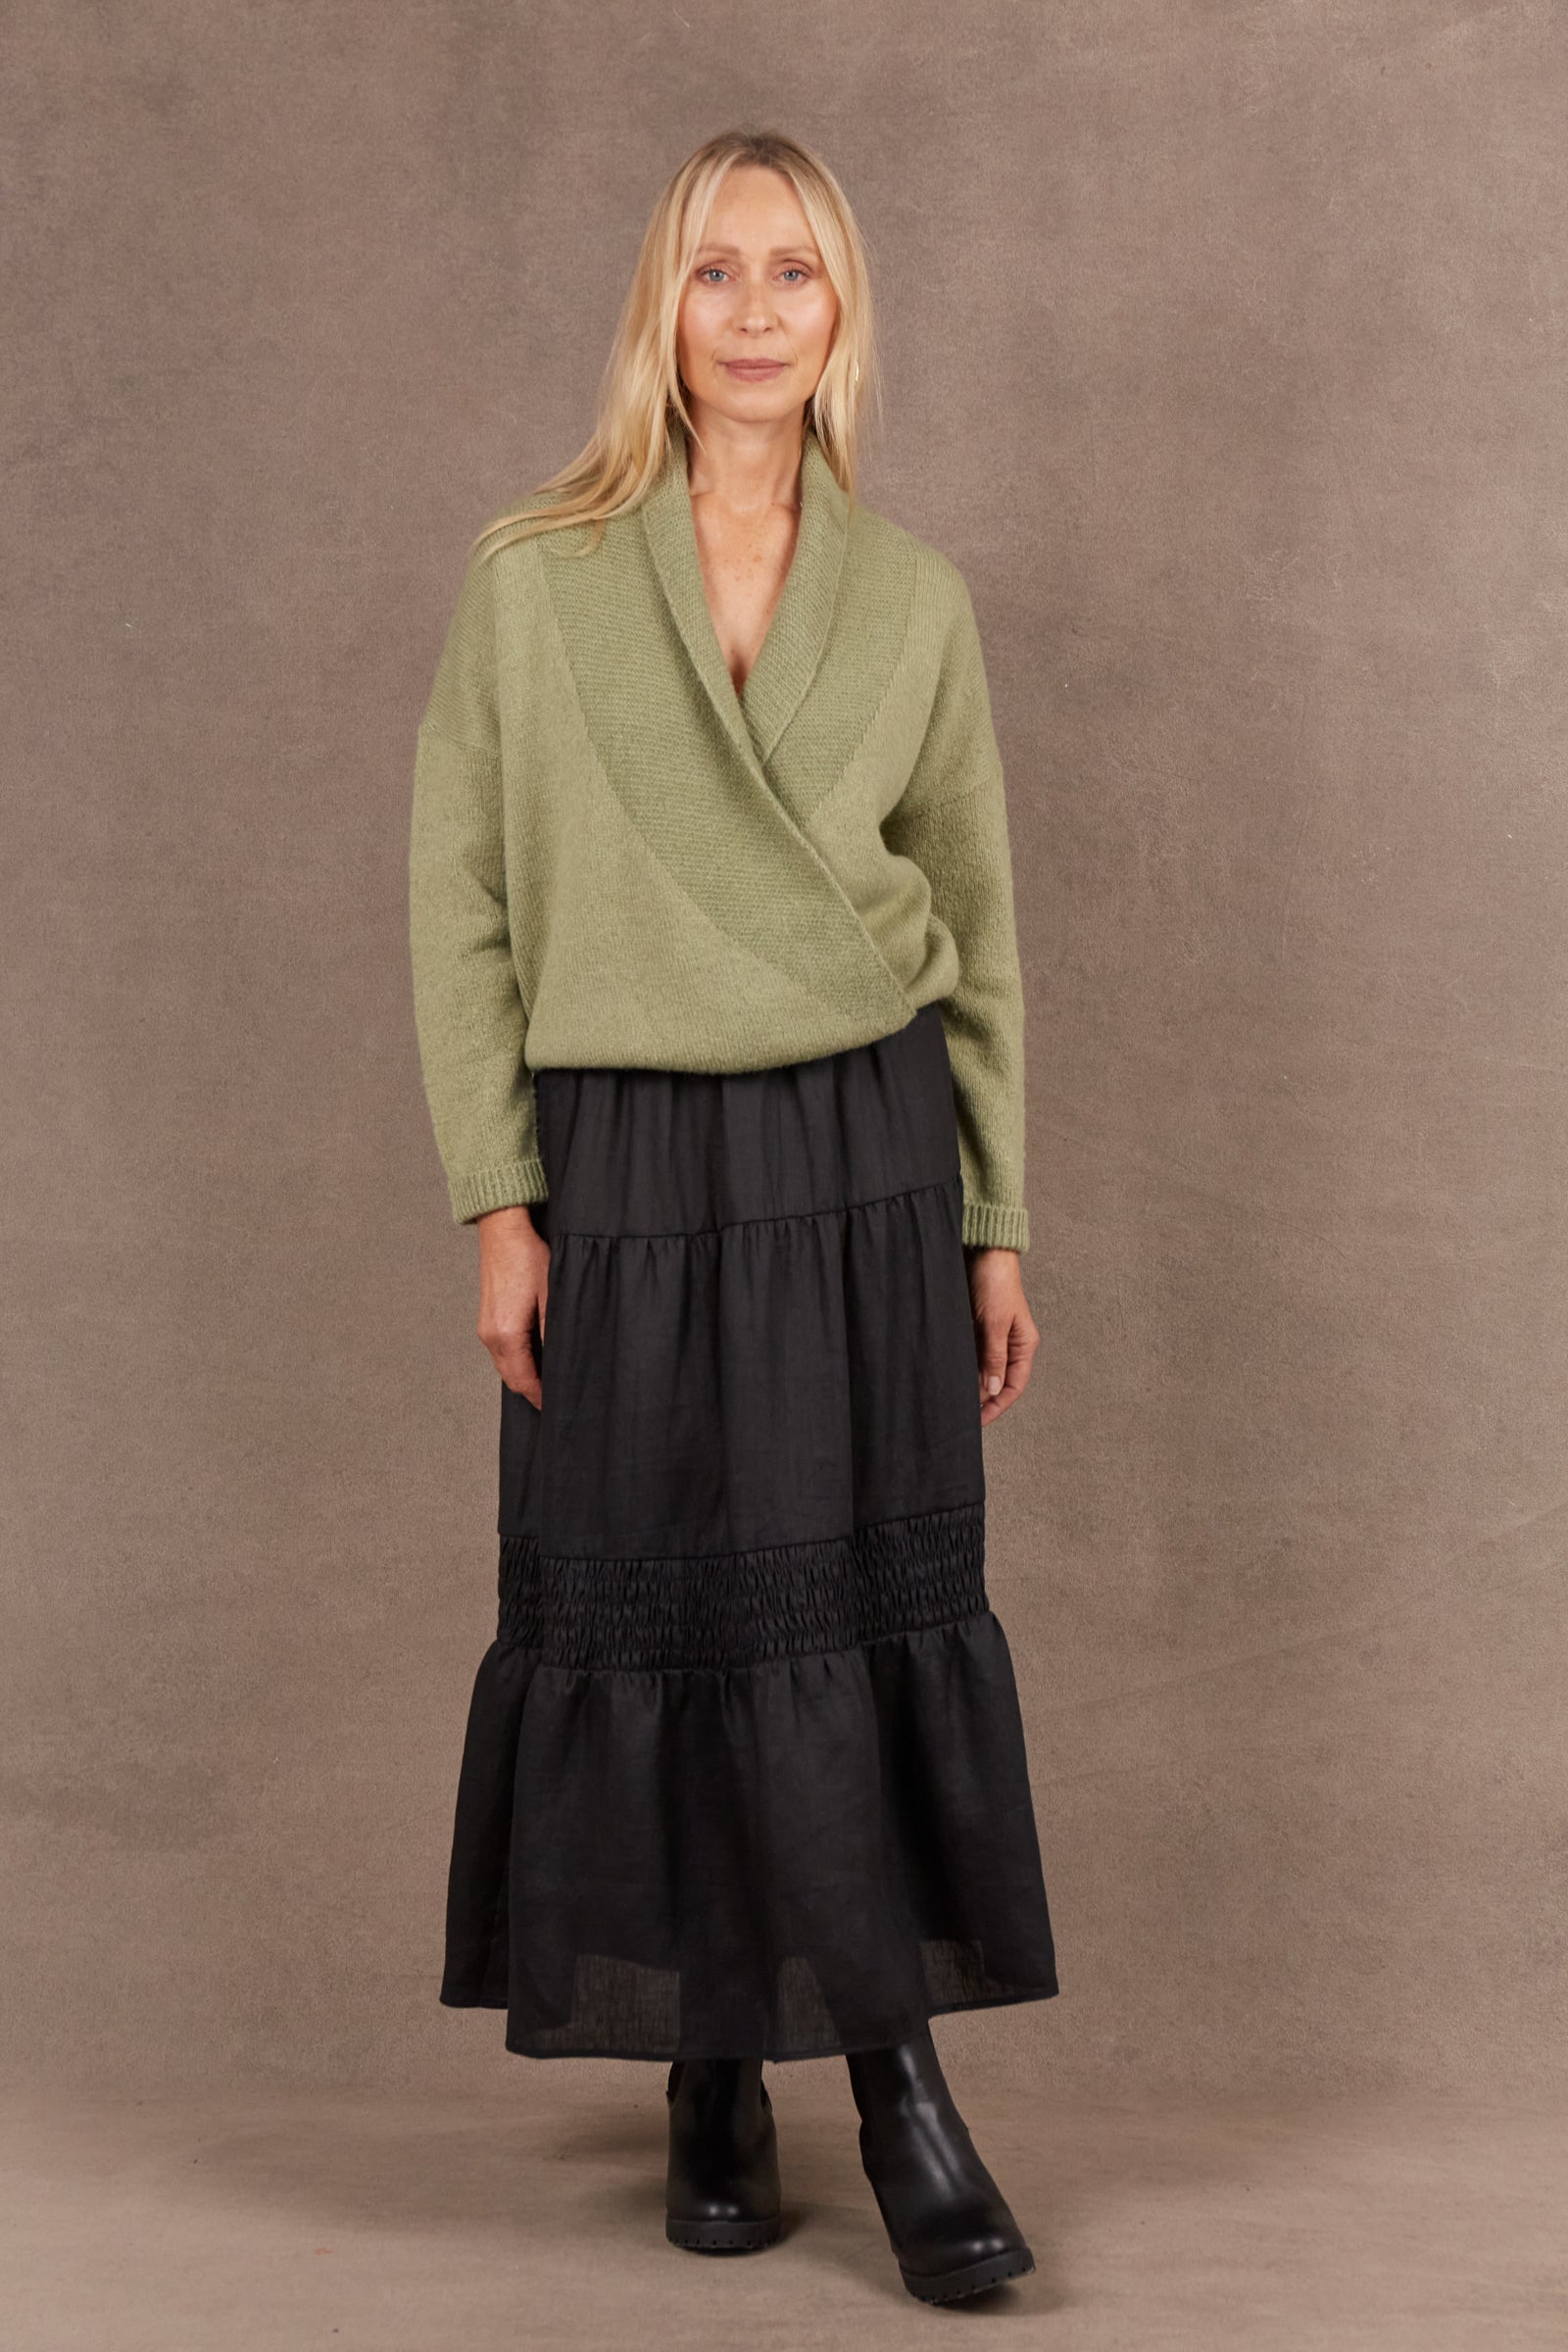 Paarl Crossover Knit - Sage-Knitwear & Jumpers-Eb & Ive-The Bay Room